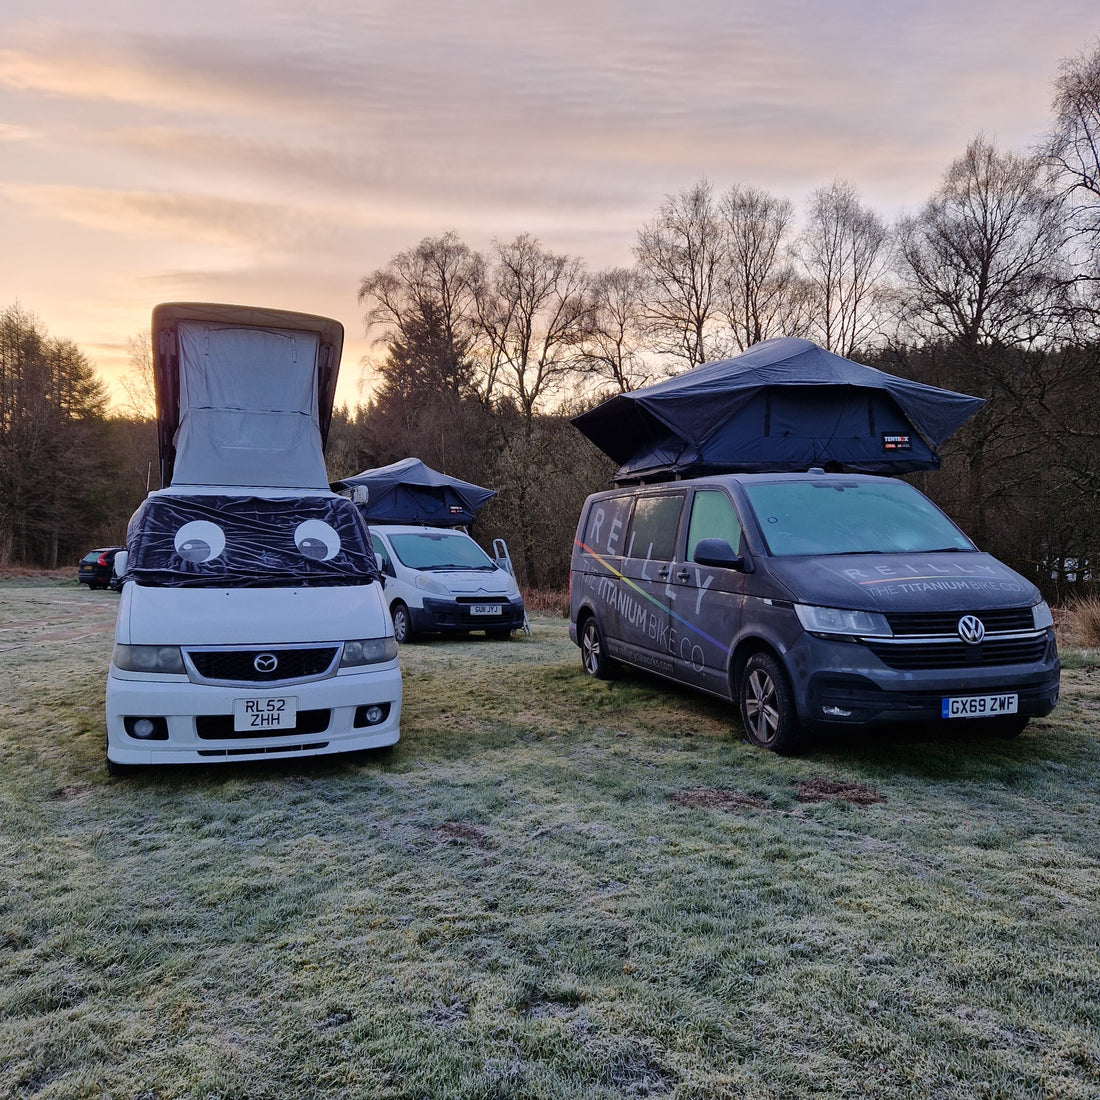 In a frost field 3 camper vans are parked 